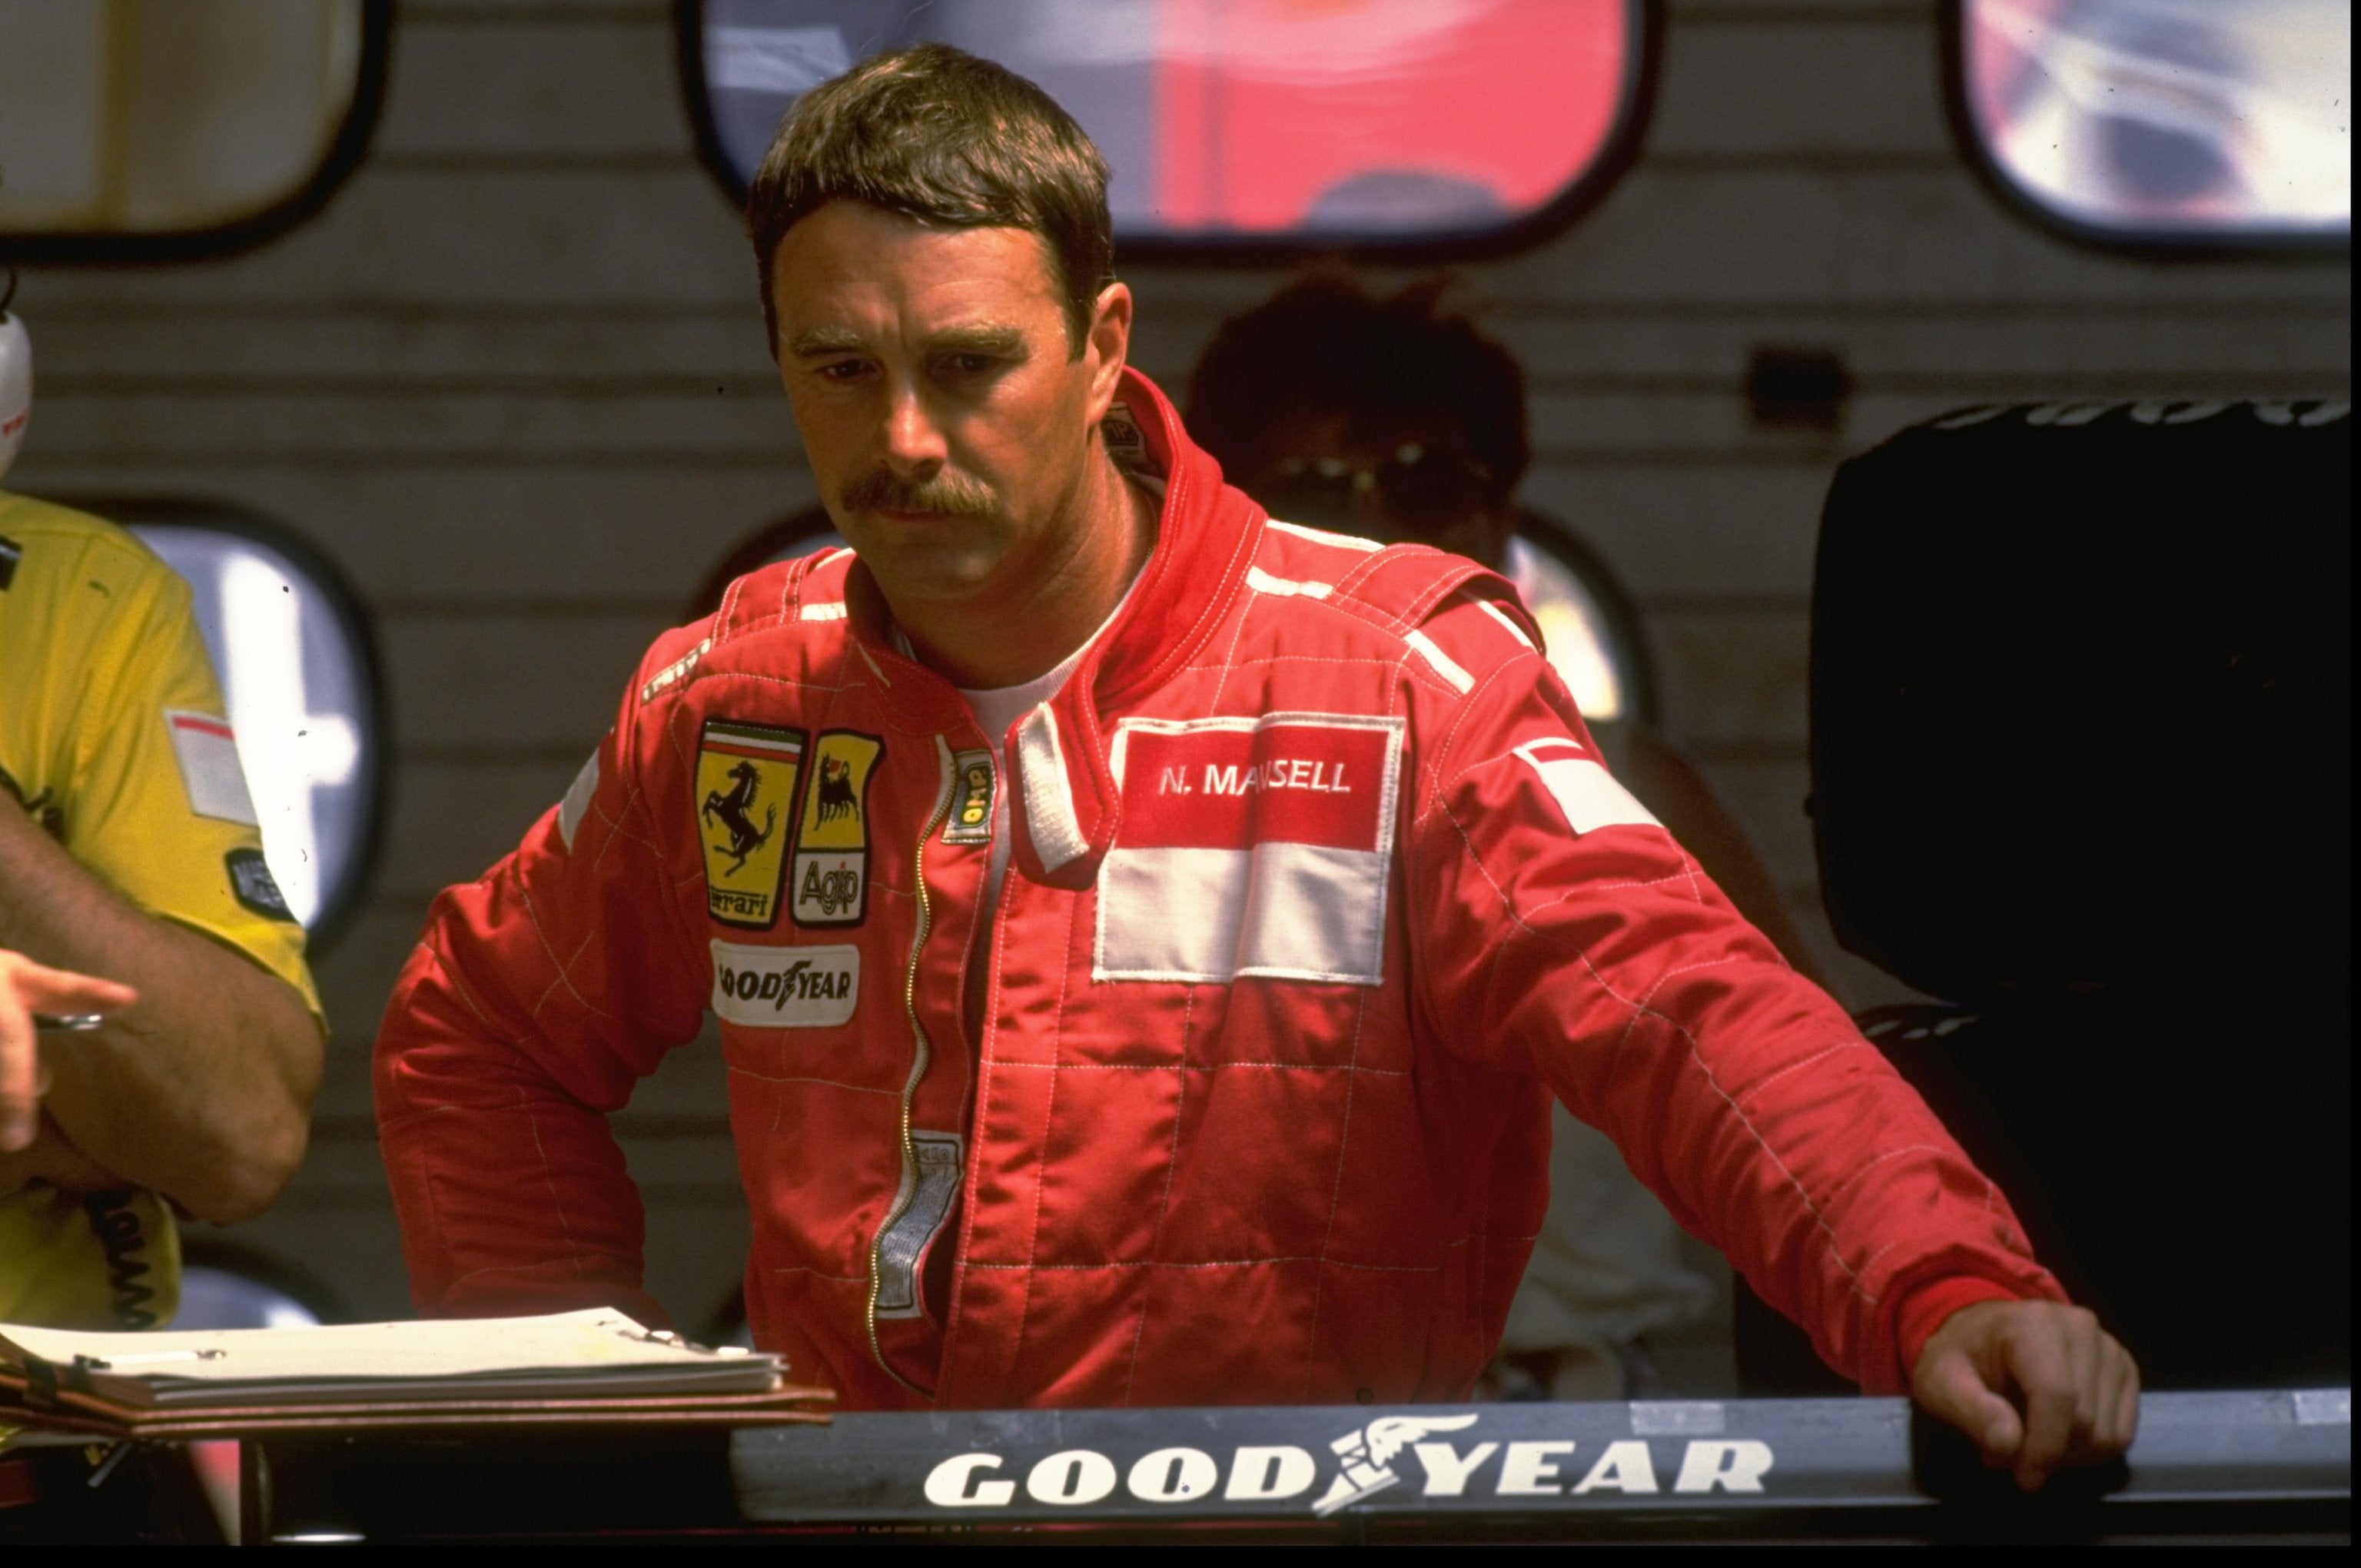 Mansell is the last British driver with a full-time seat at Ferrari